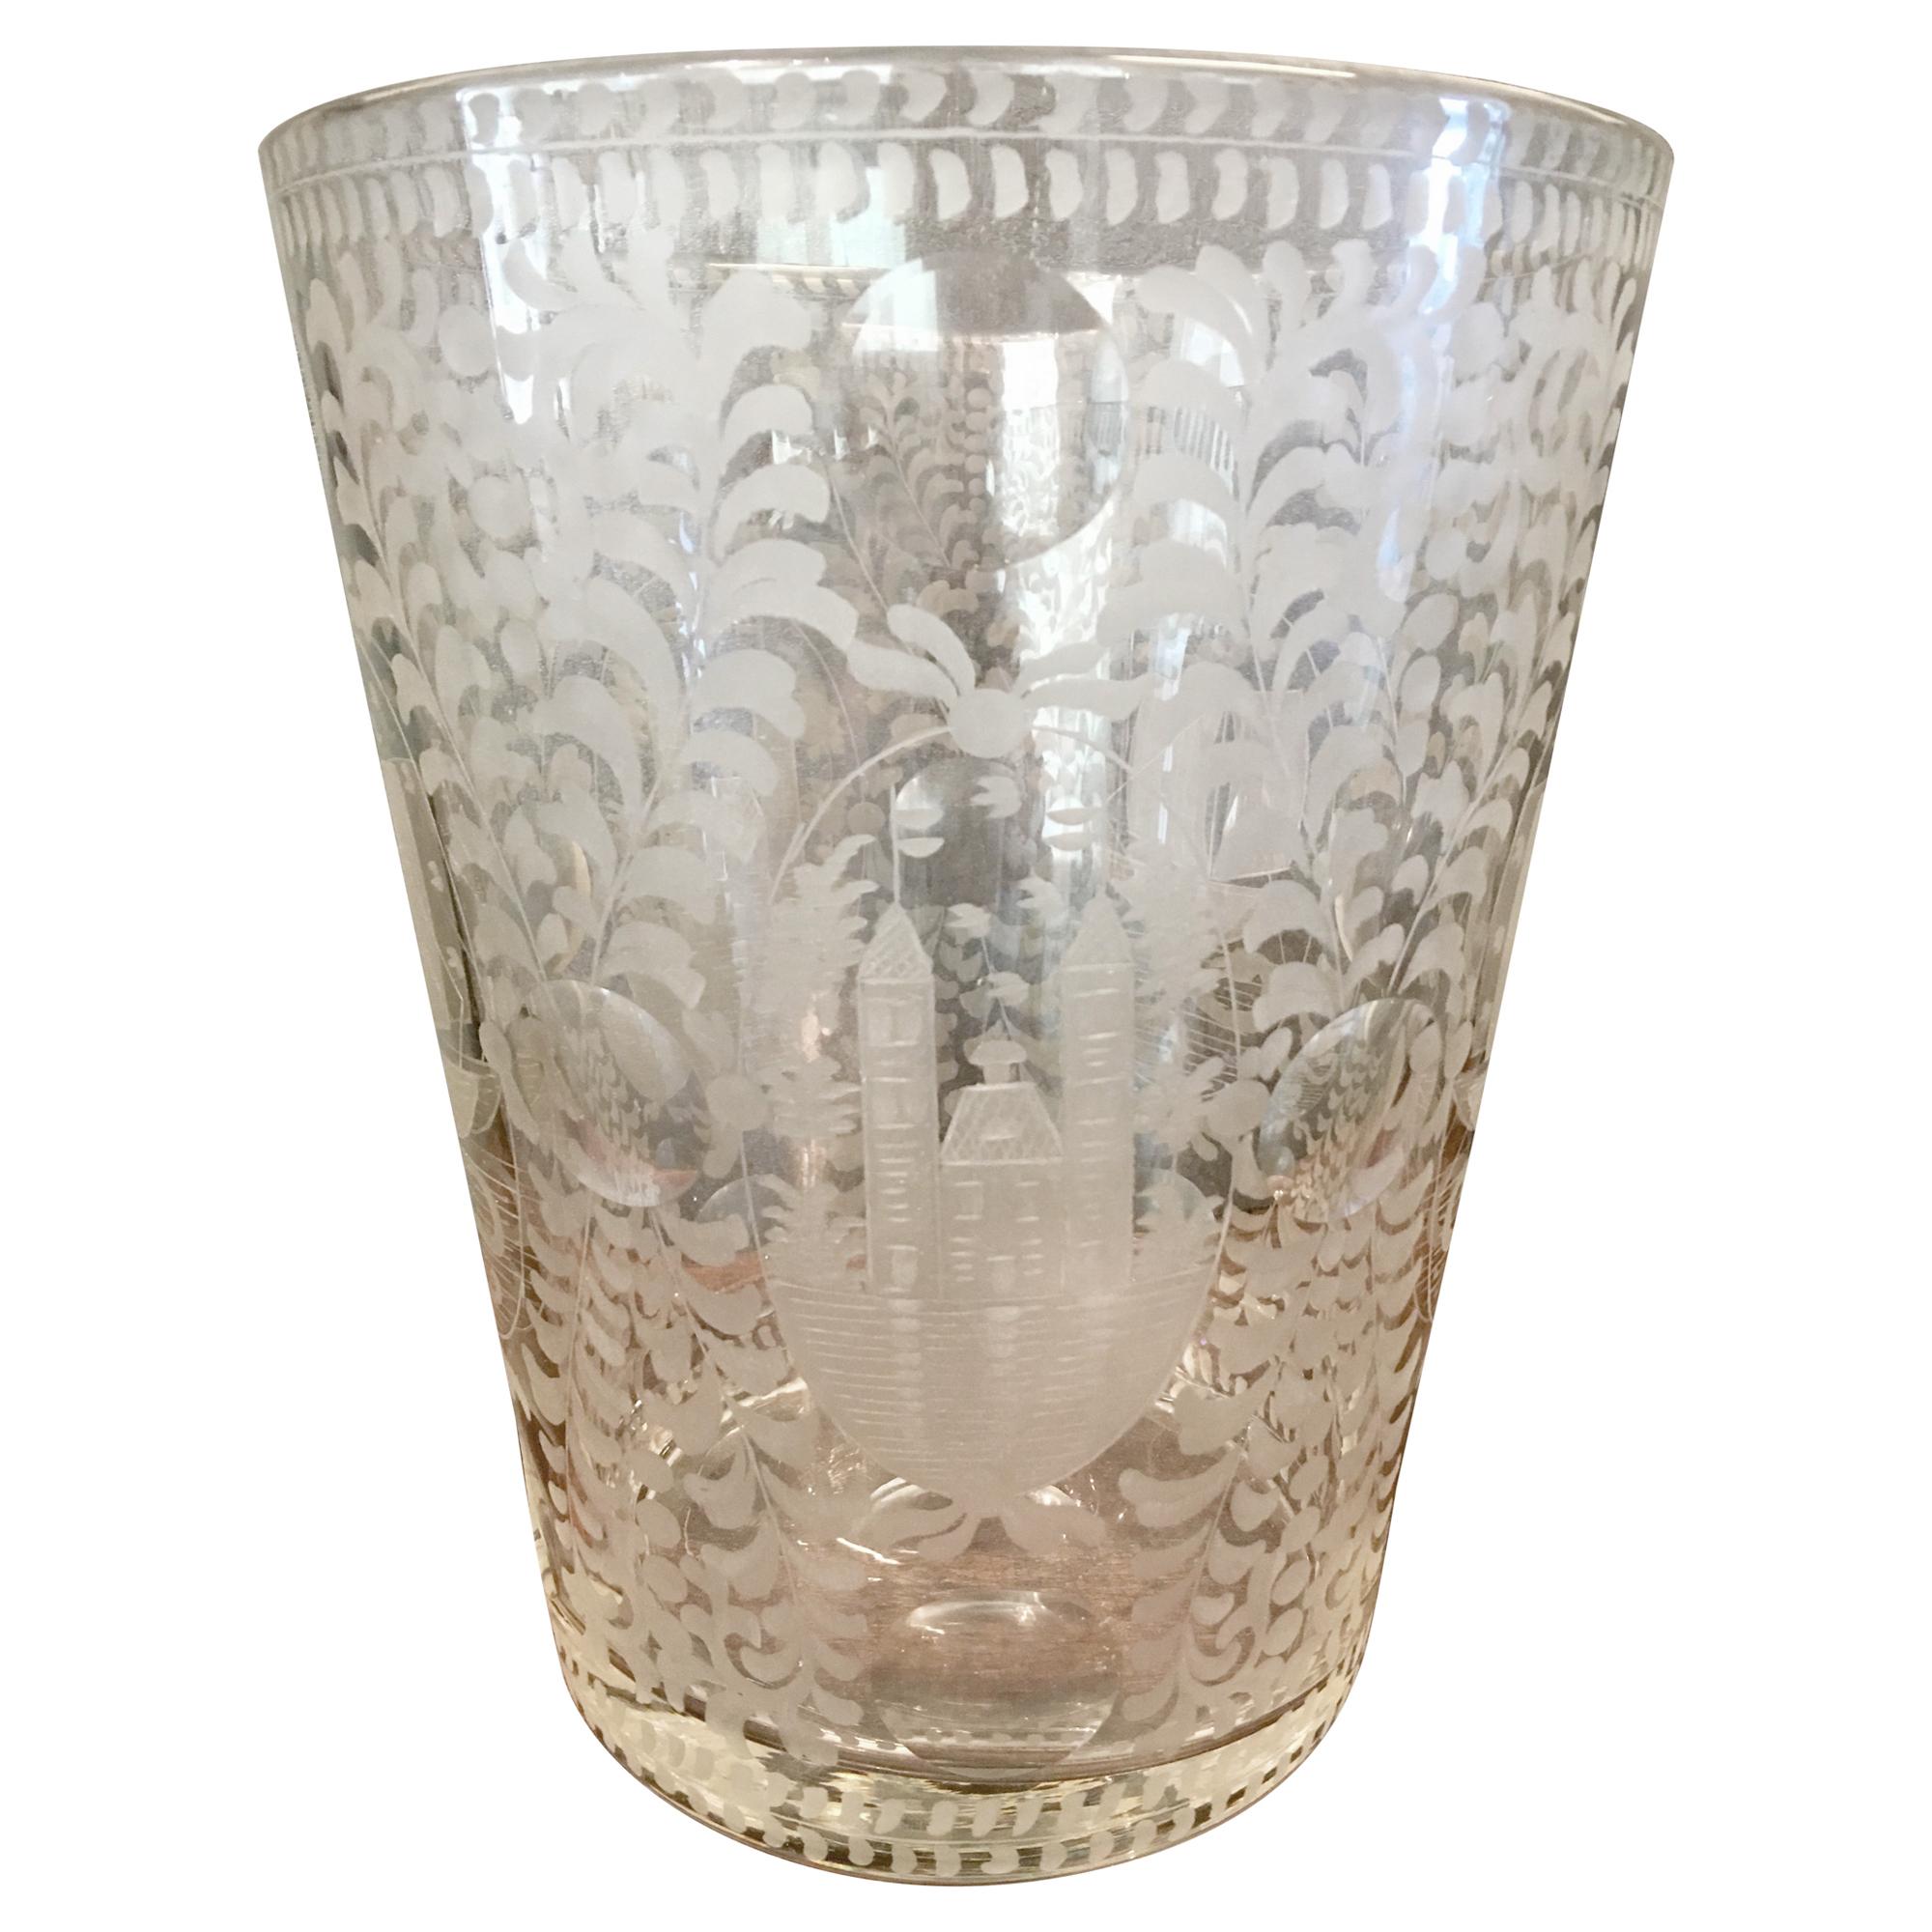 Dutch Large Etched Glass Vase, 19th Century